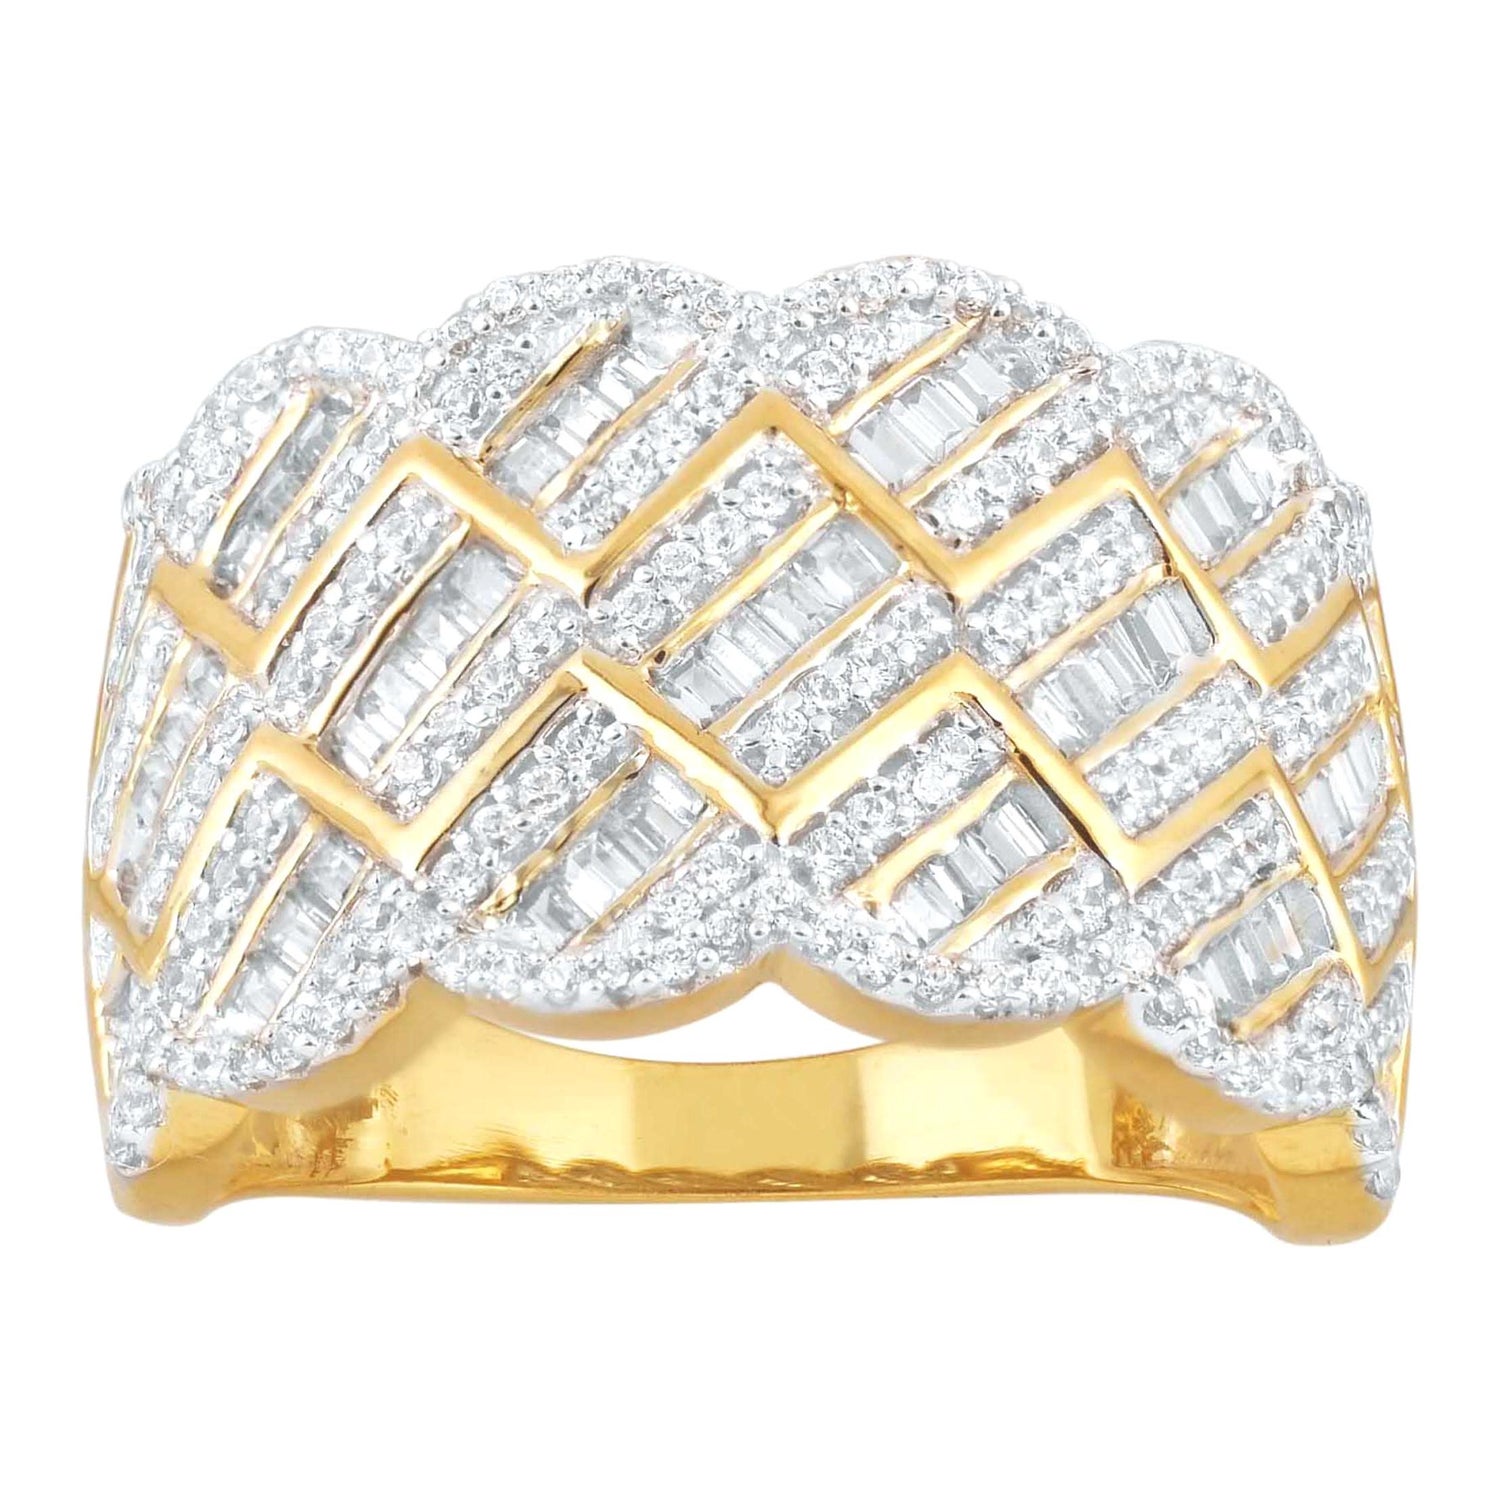 At Auction: 10k yellow gold chanel white baguette cut and round